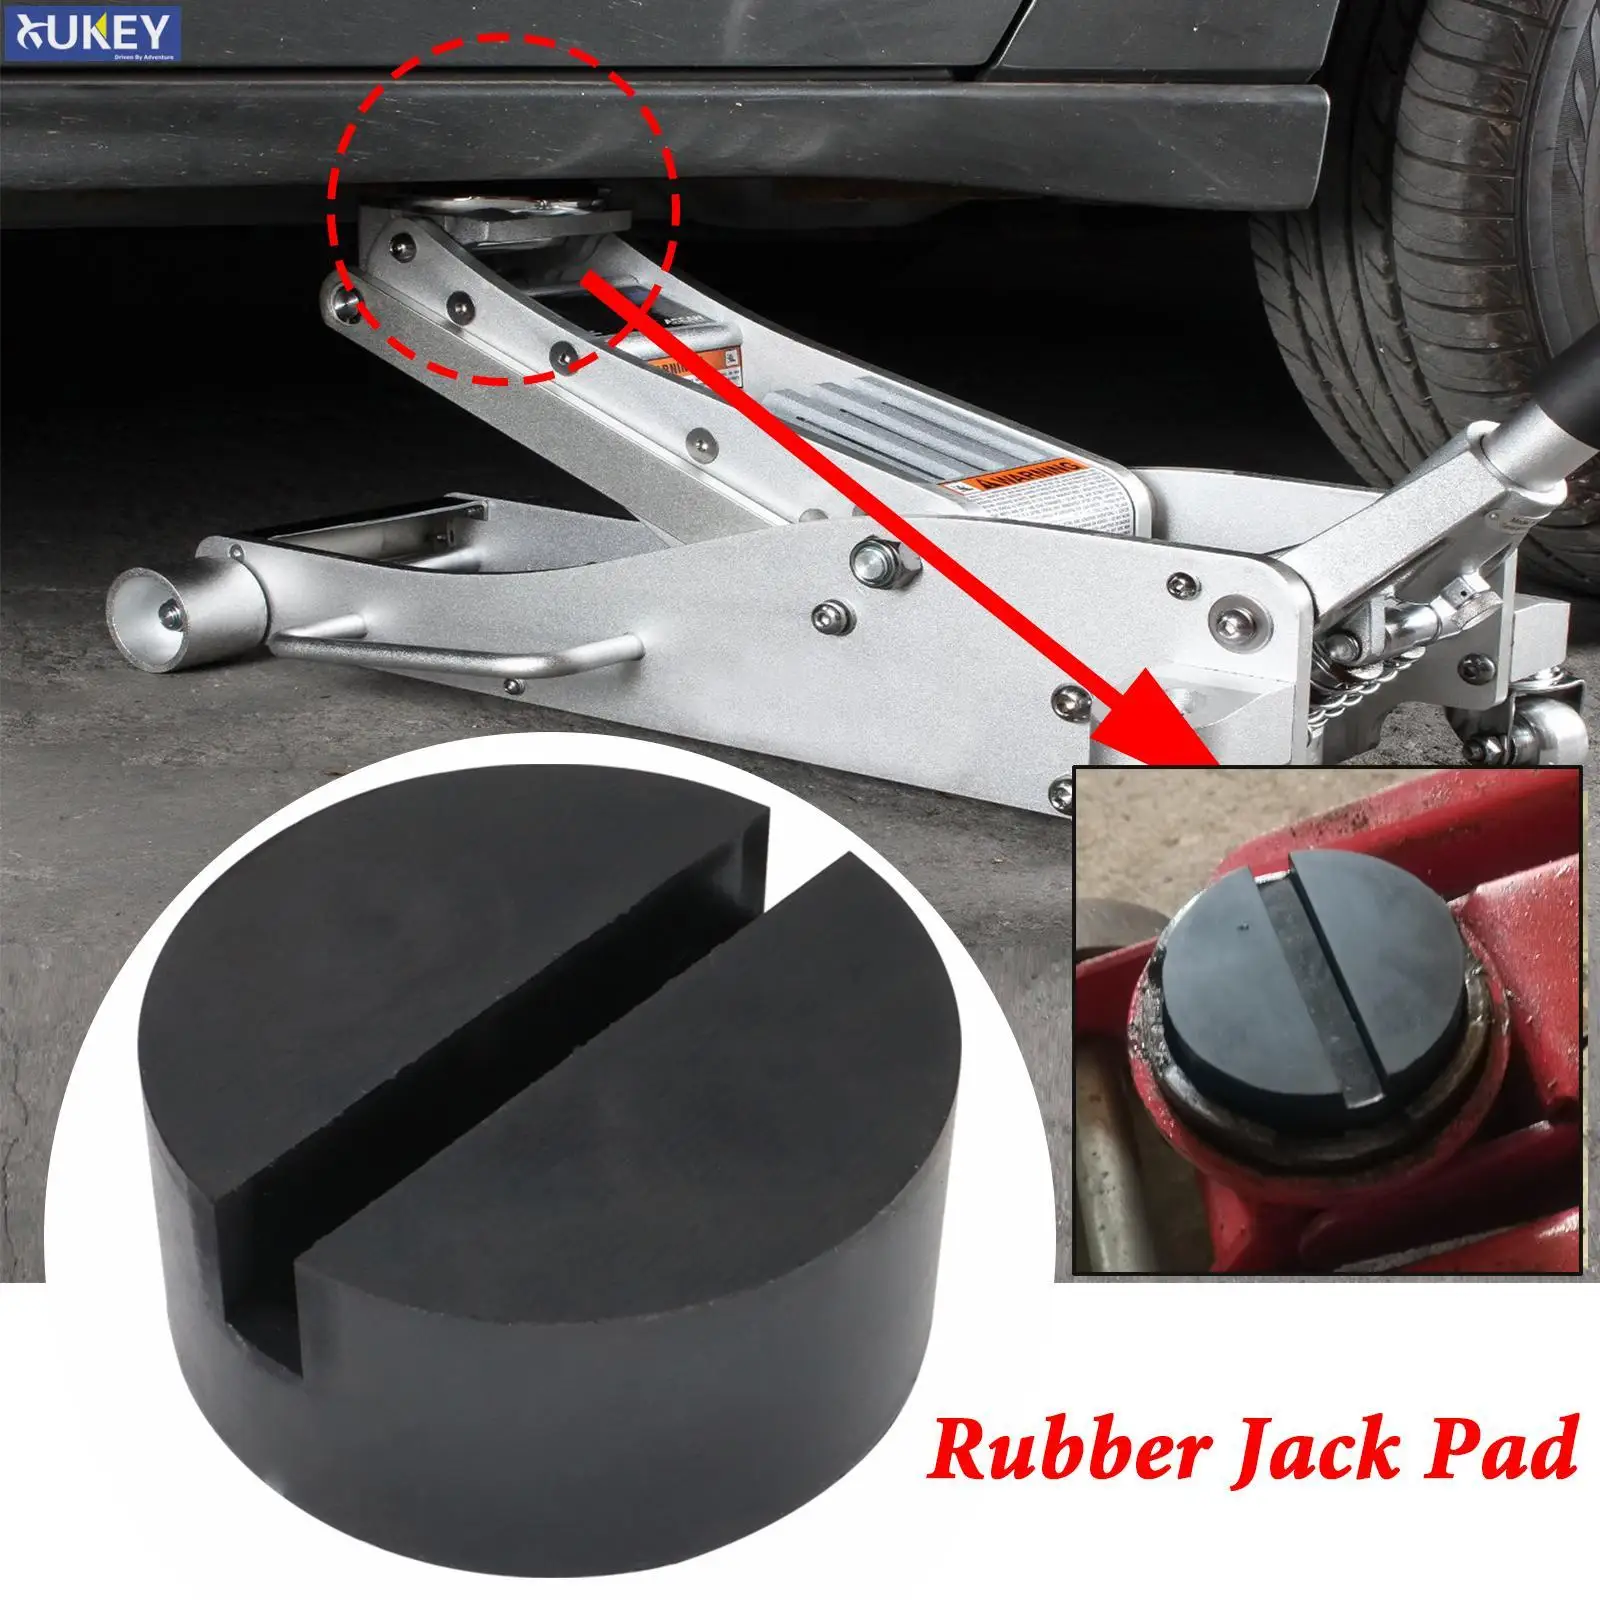 Bottle Jack Rubber Pad Anti-slip Adapter Support Point Adapter Car Lift Tool 